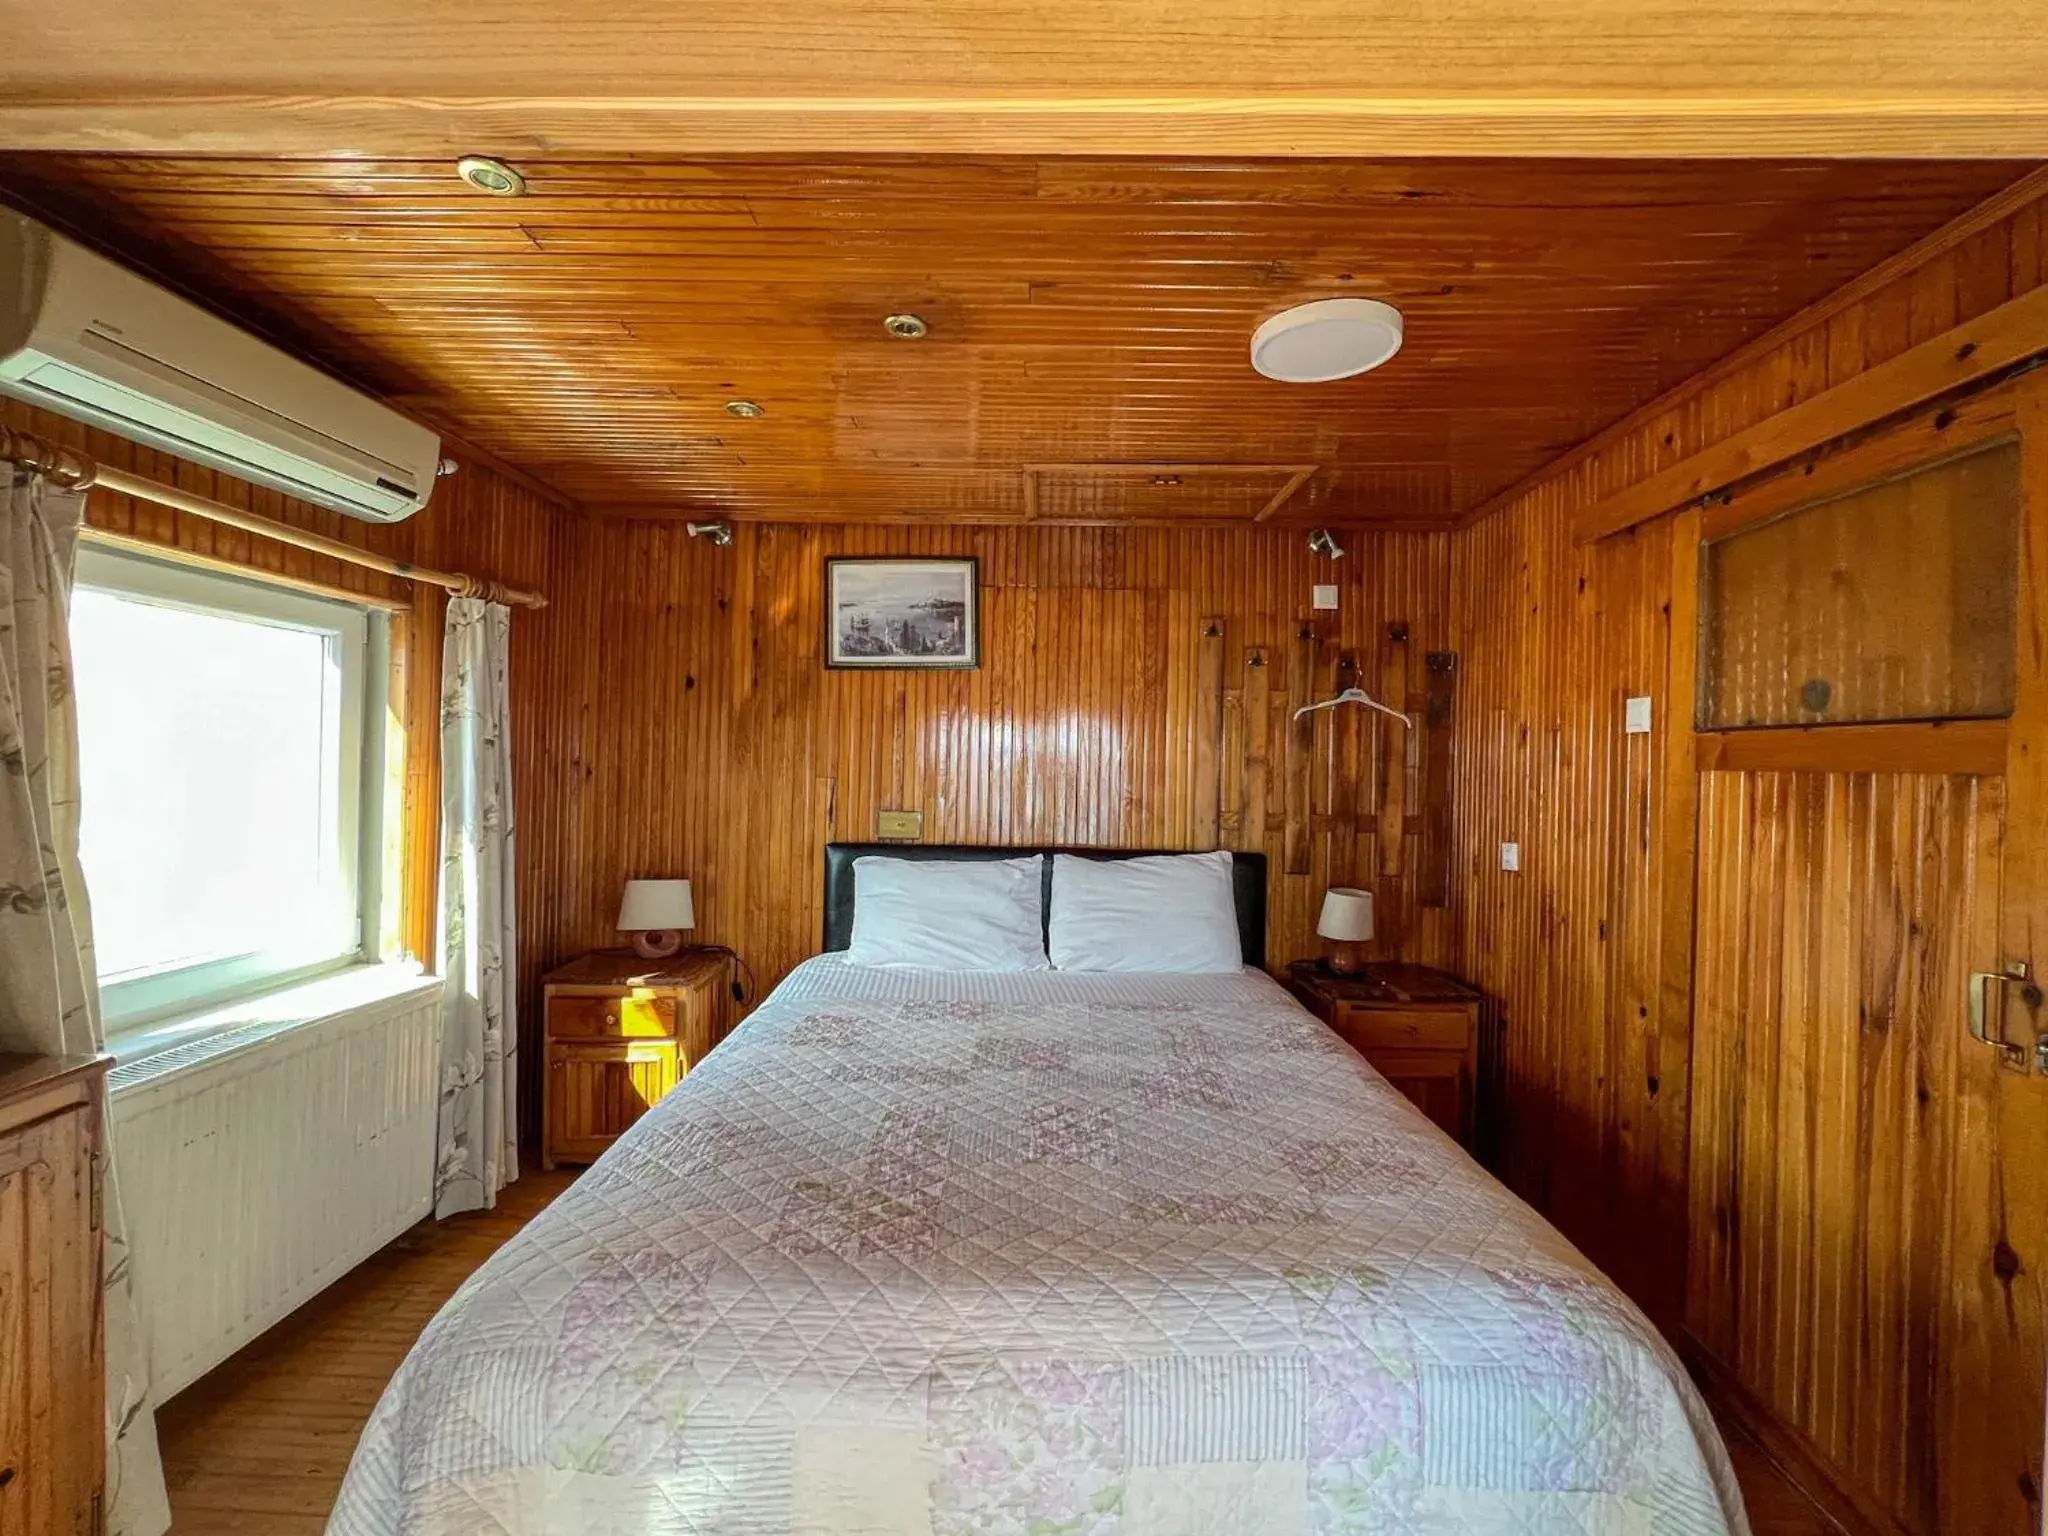 Bed in Lale Pension                                                                                